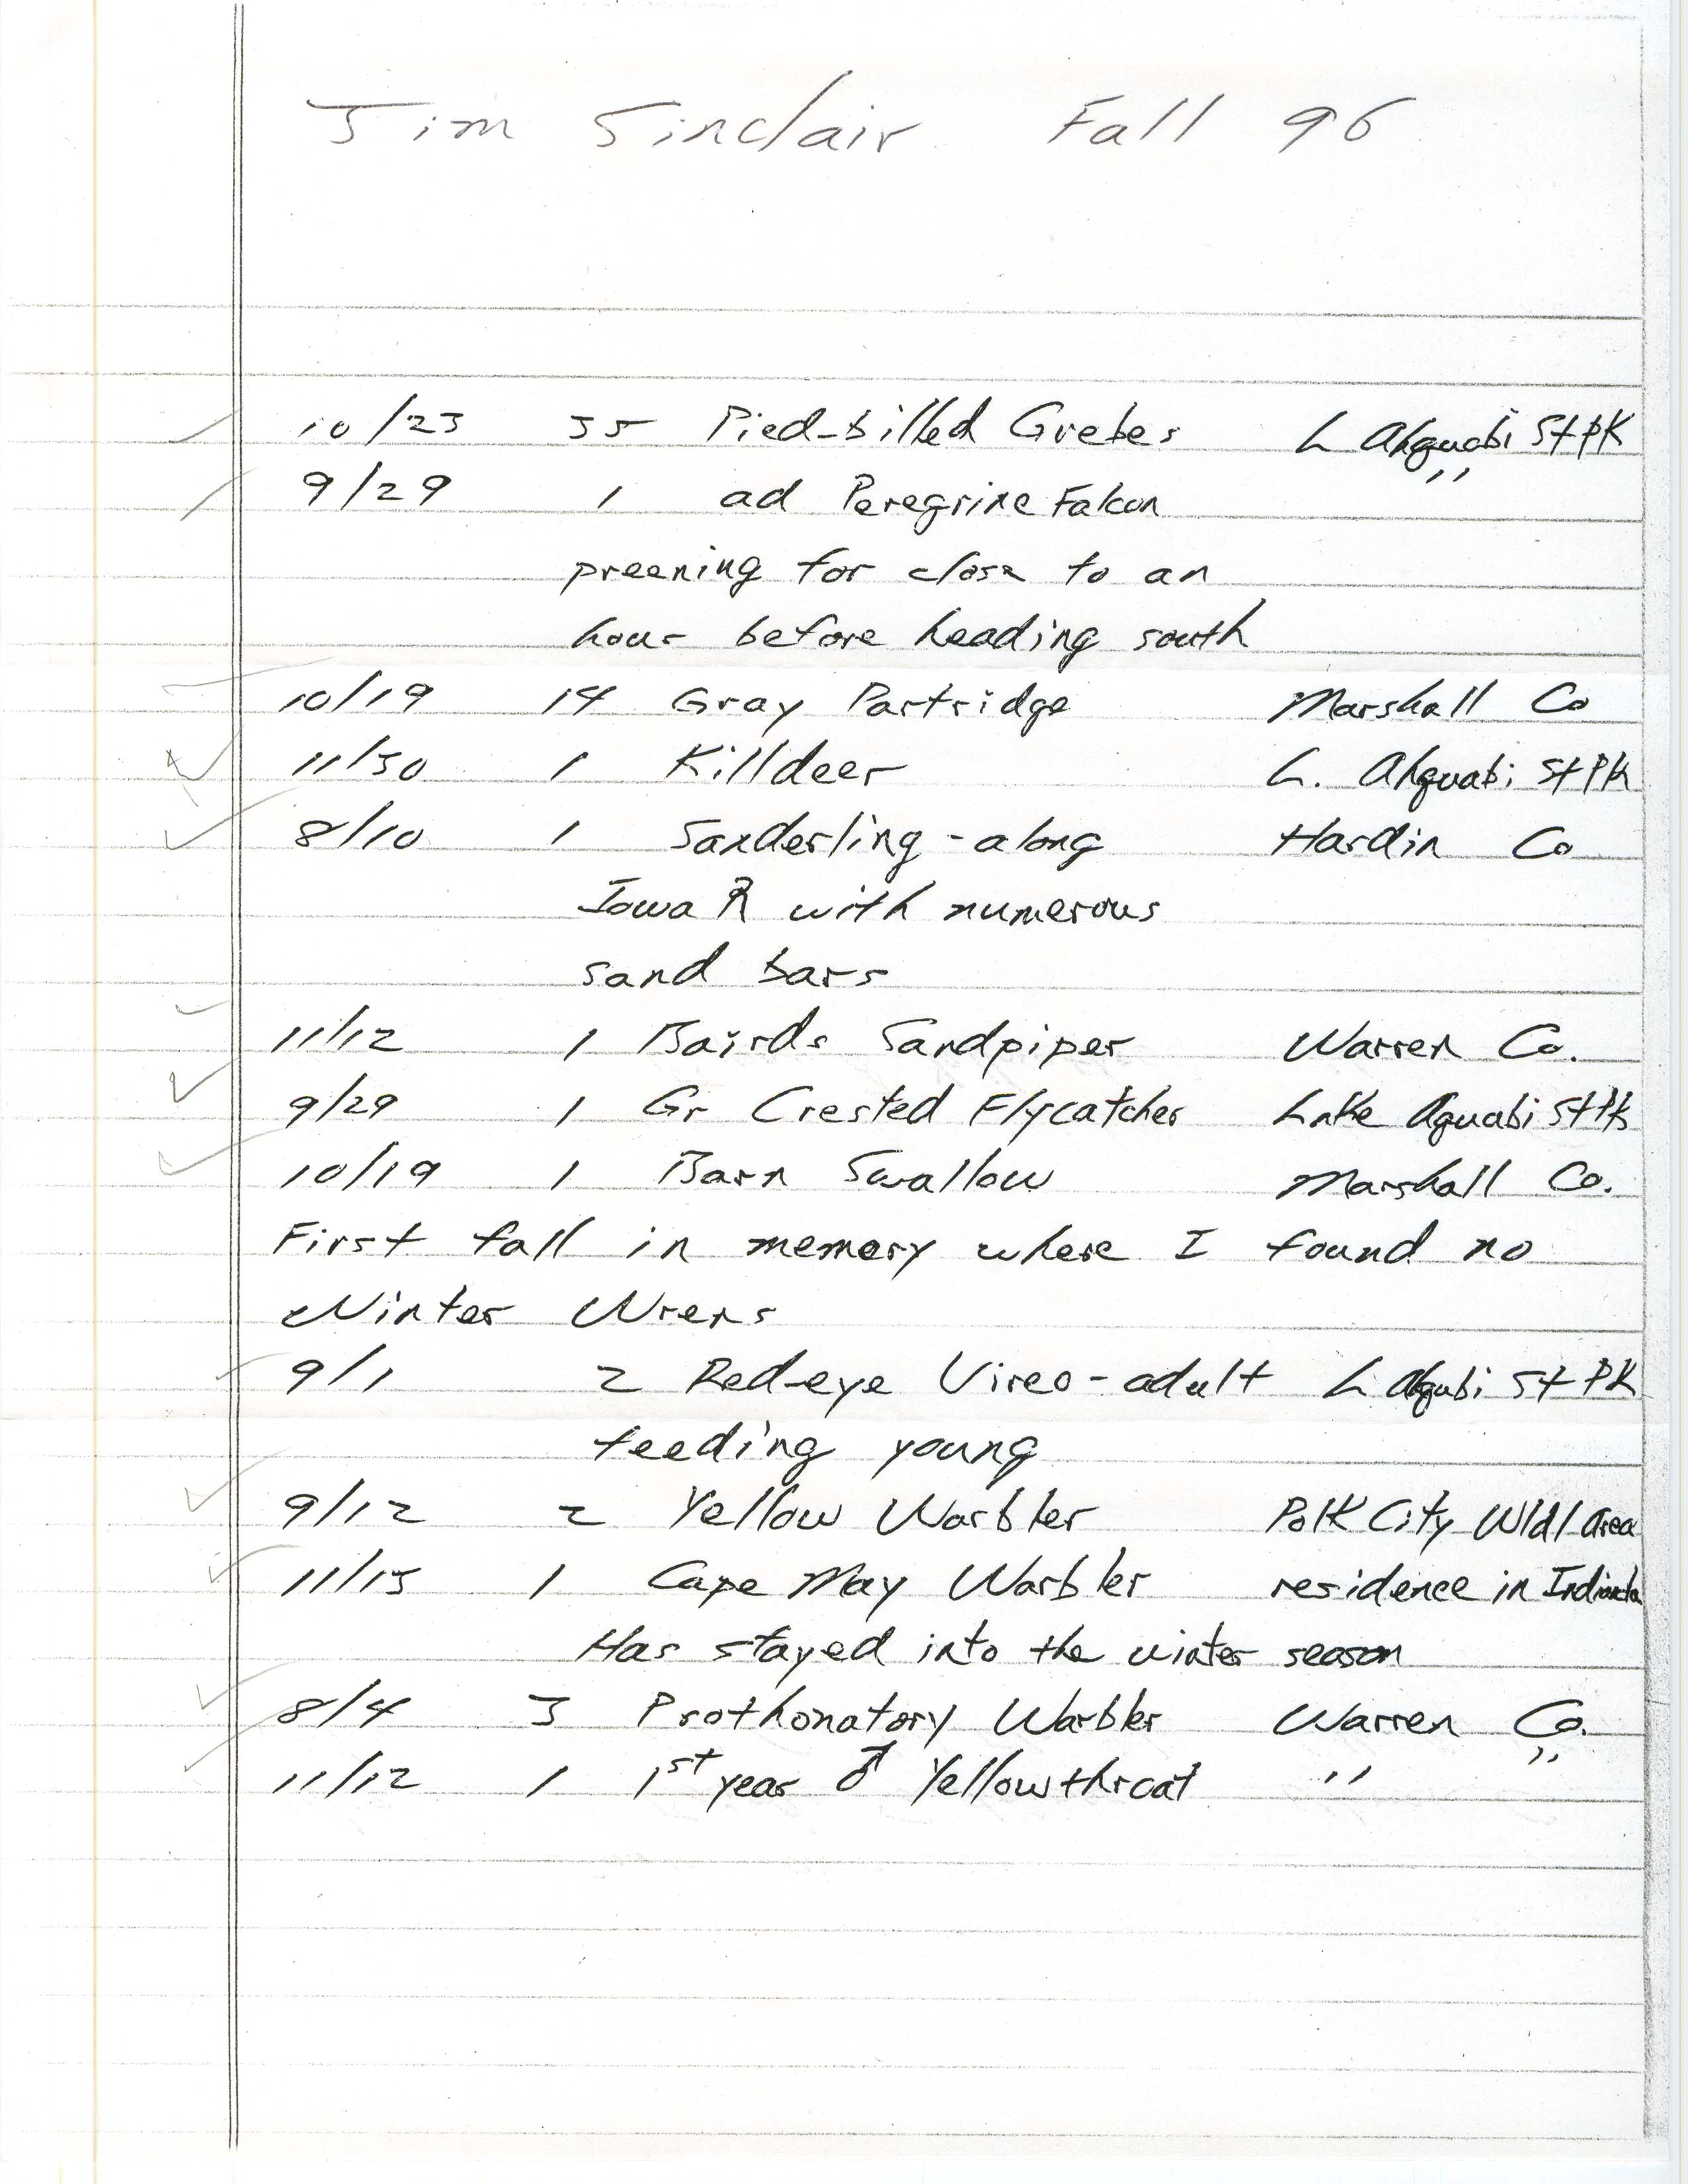 Field notes contributed by Jim Sinclair, fall 1996